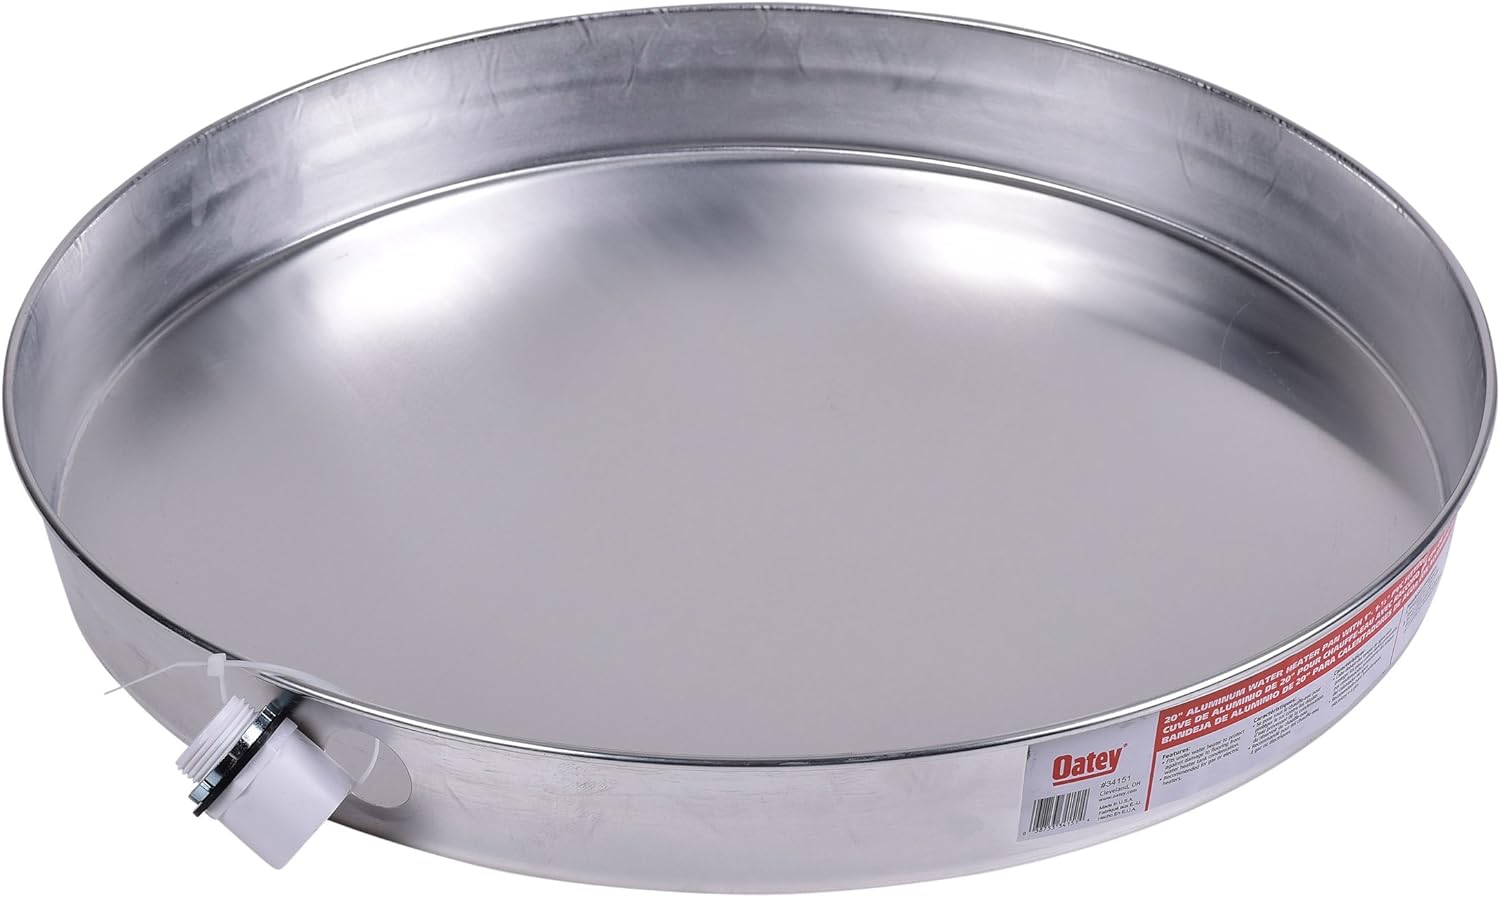 Oatey 34151 Aluminum Water Heater Pan With 1 Inch Fitting 20 Inch